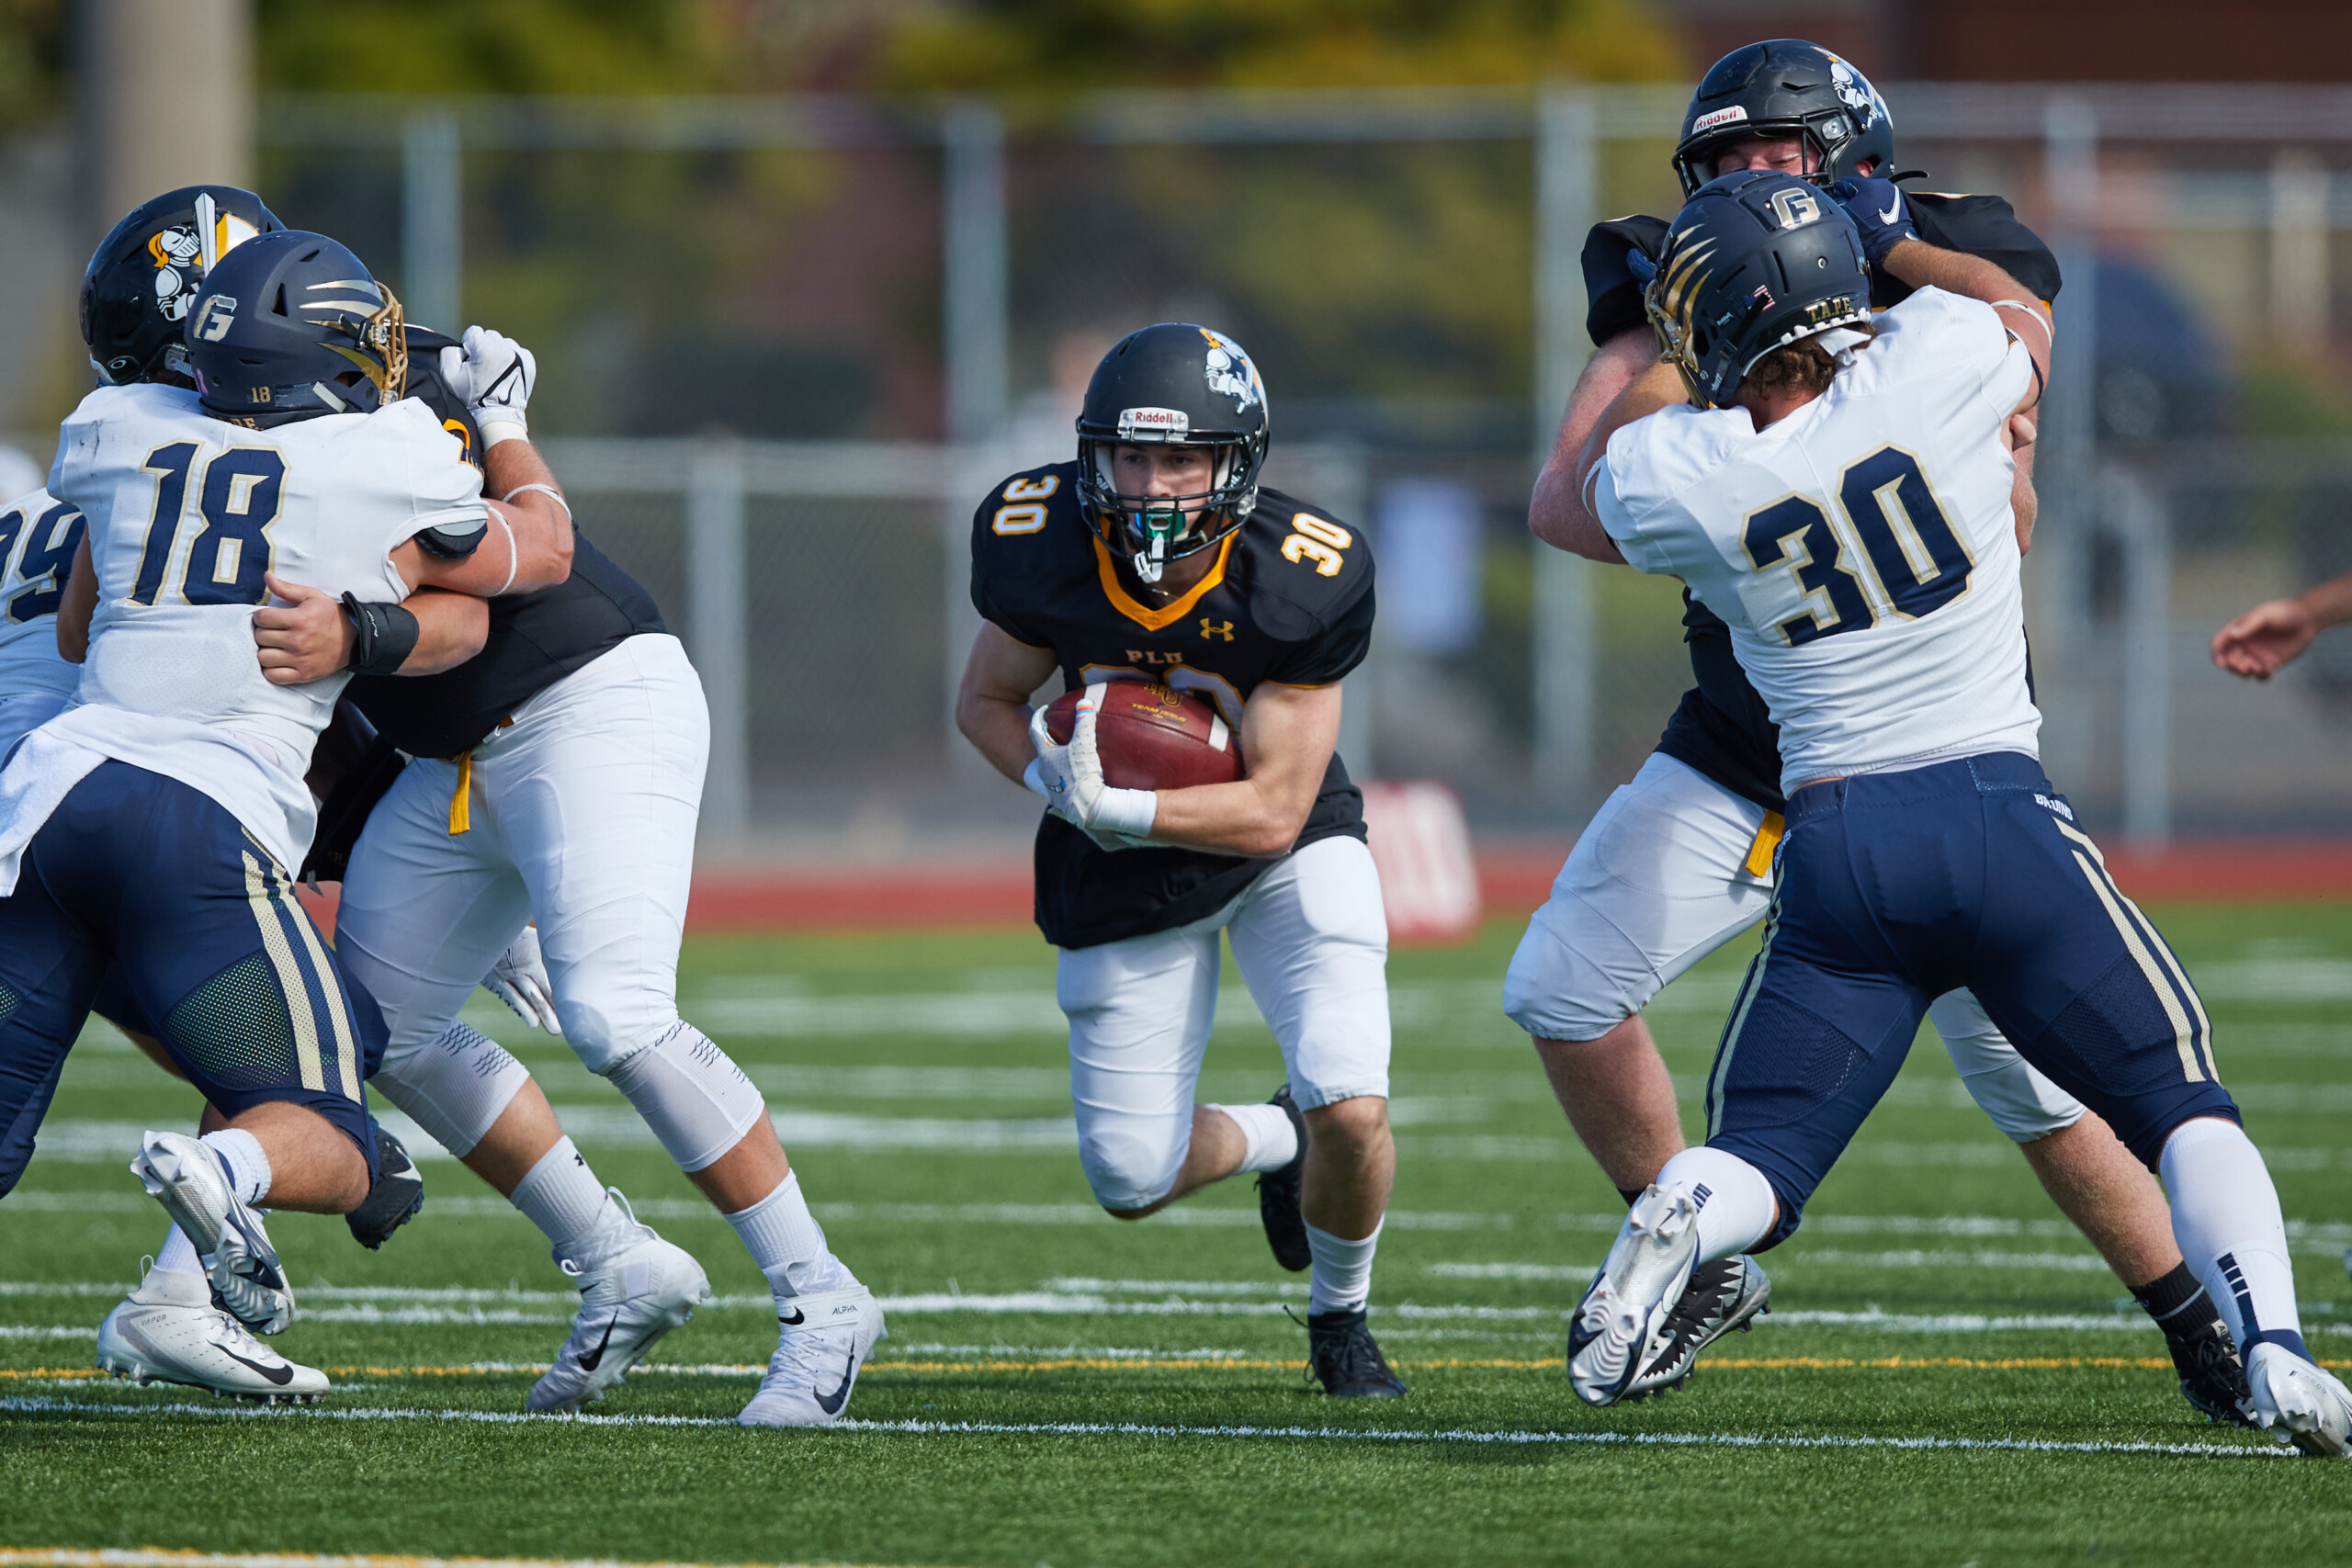 PLU football player runs between two players from George Fox while holding football.